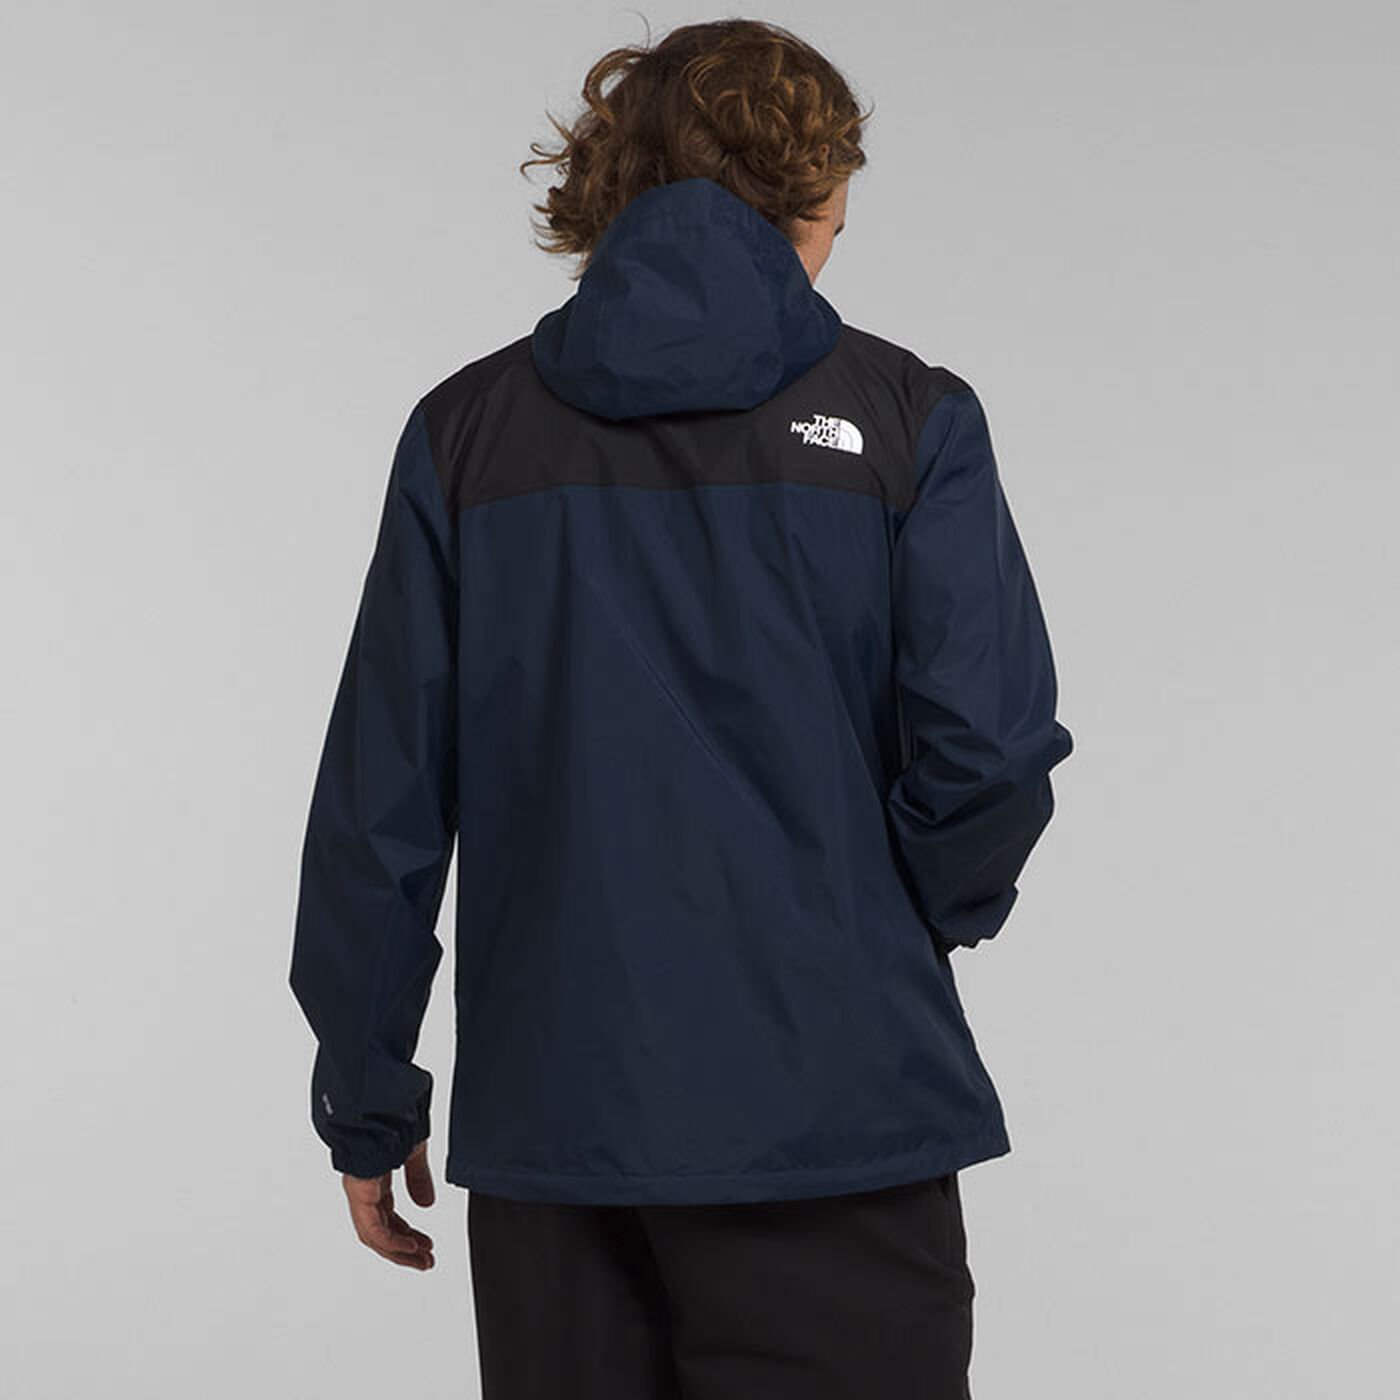 Men's Antora Jacket | The North Face | Sporting Life Online